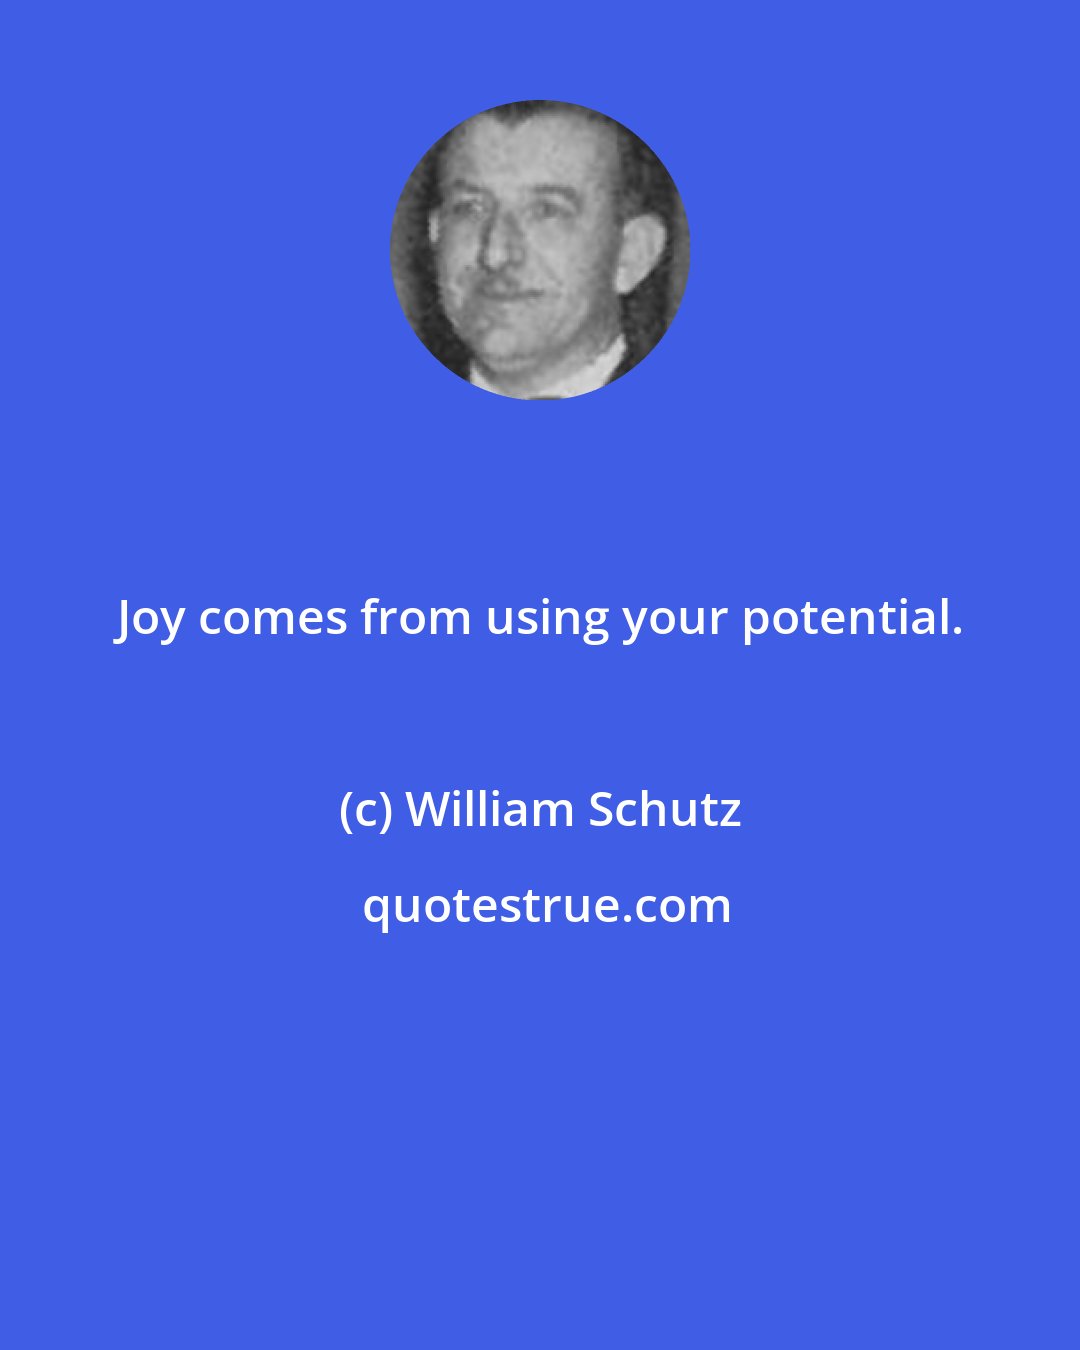 William Schutz: Joy comes from using your potential.